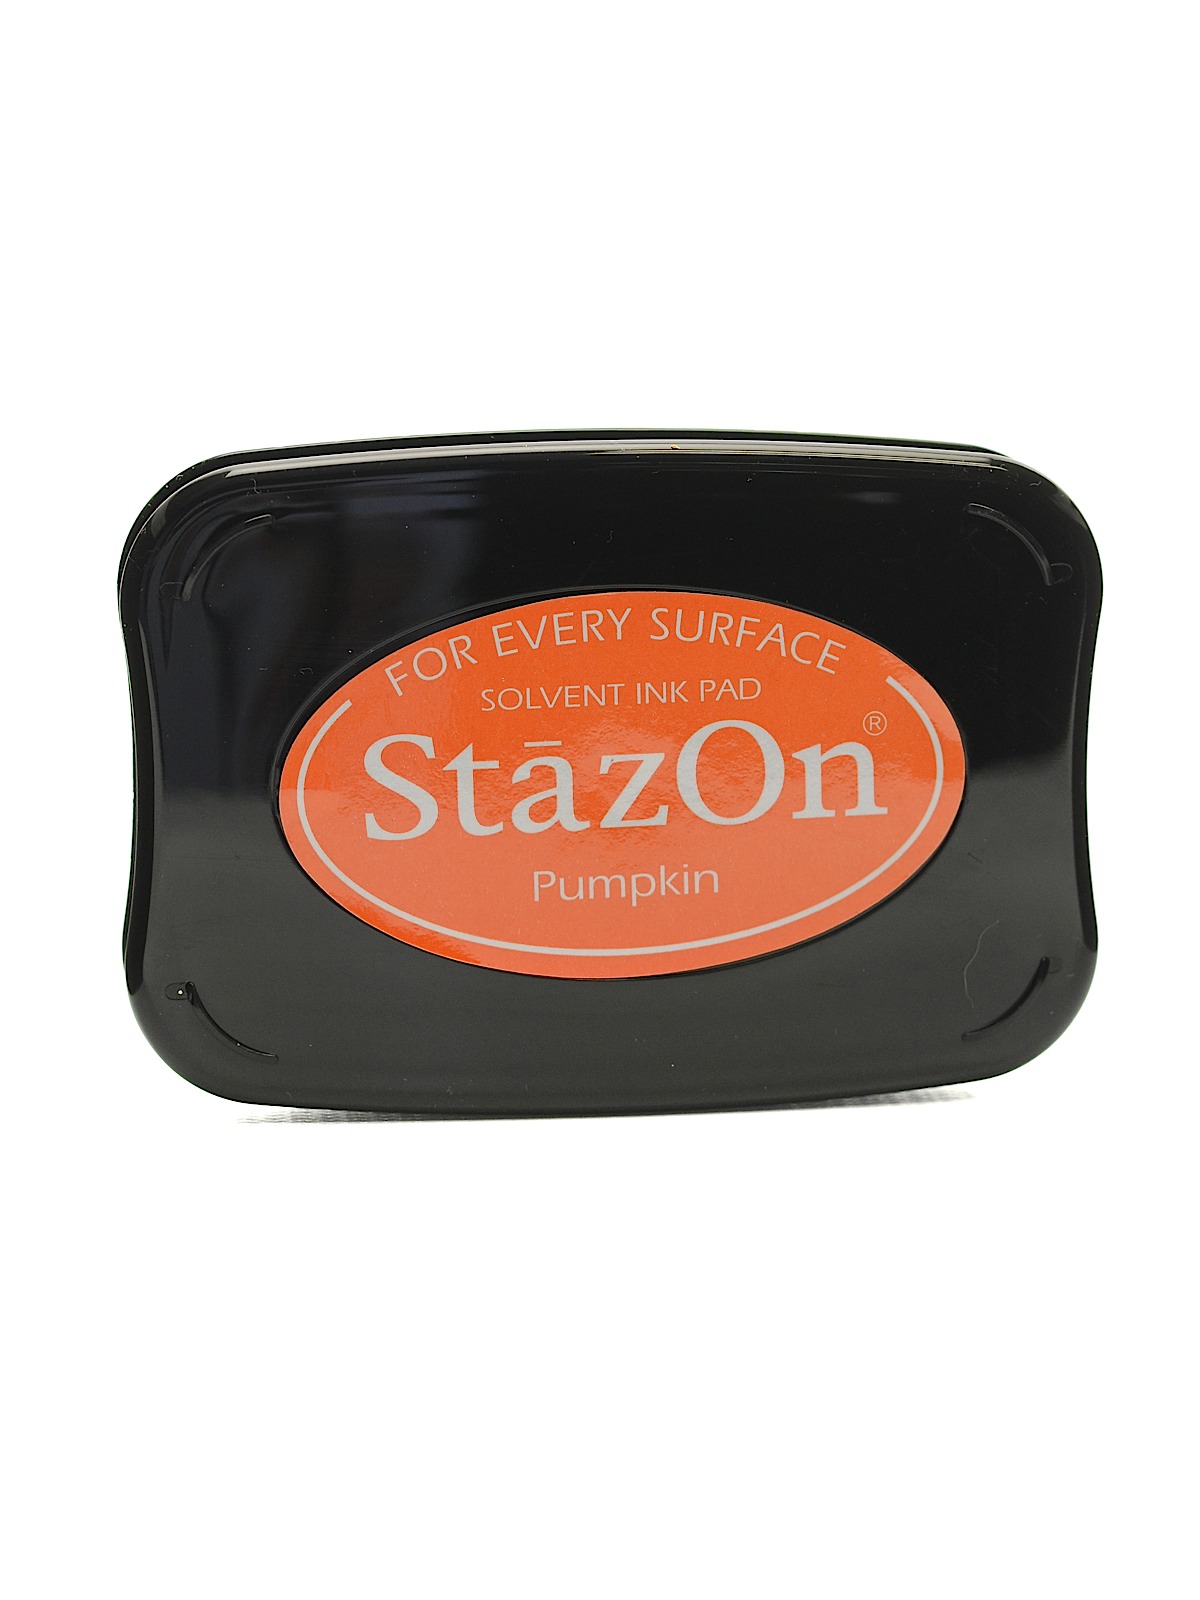 Stazon Solvent Ink Pumpkin 3.75 In. X 2.625 In. Full-size Pad